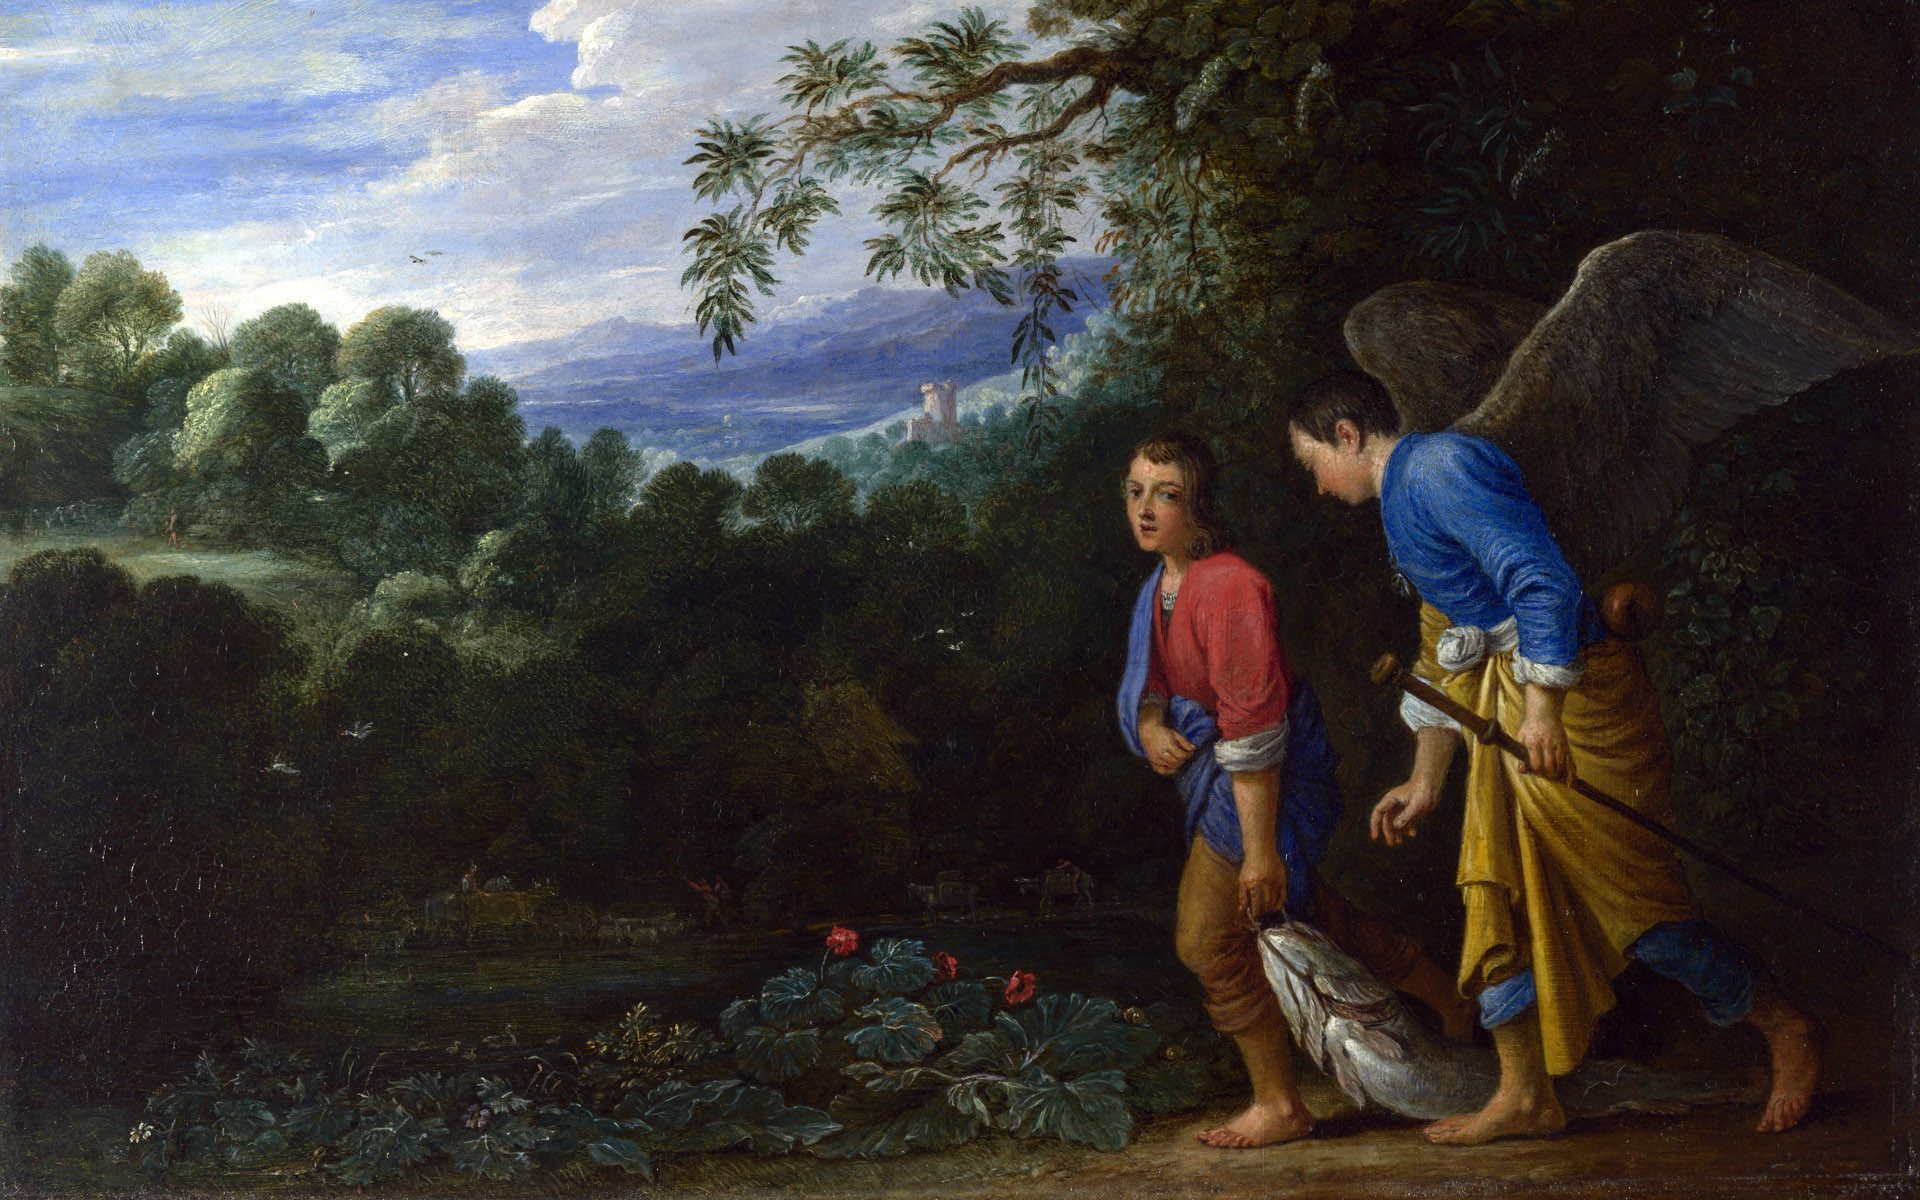 1920x1200 Full title: Tobias and the Archangel Raphael Artist: After Adam Elsheimer  Date made: